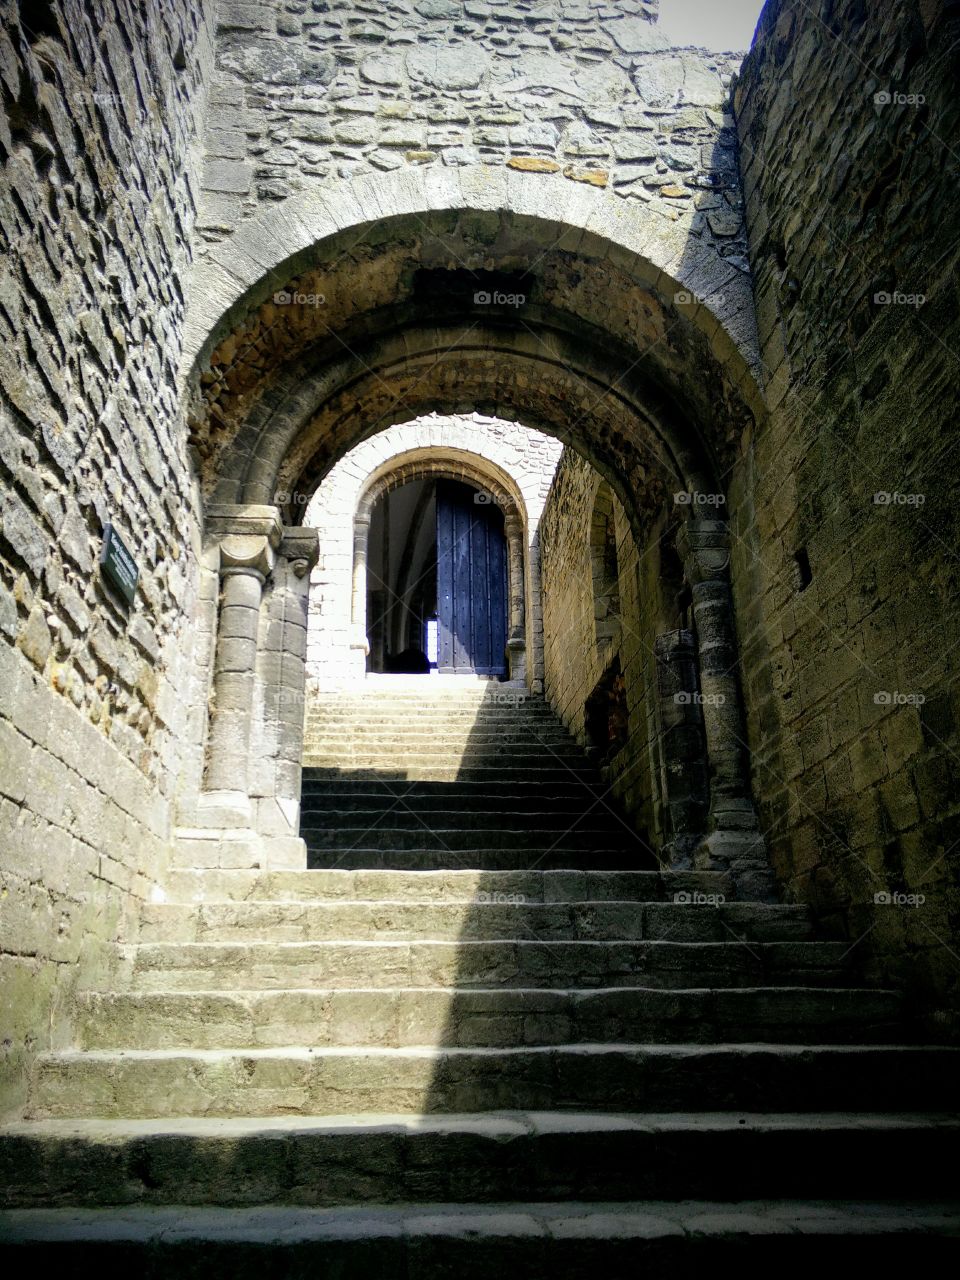 Entrance to ruins of Castle Rising medieval castle in the UK looking up steps